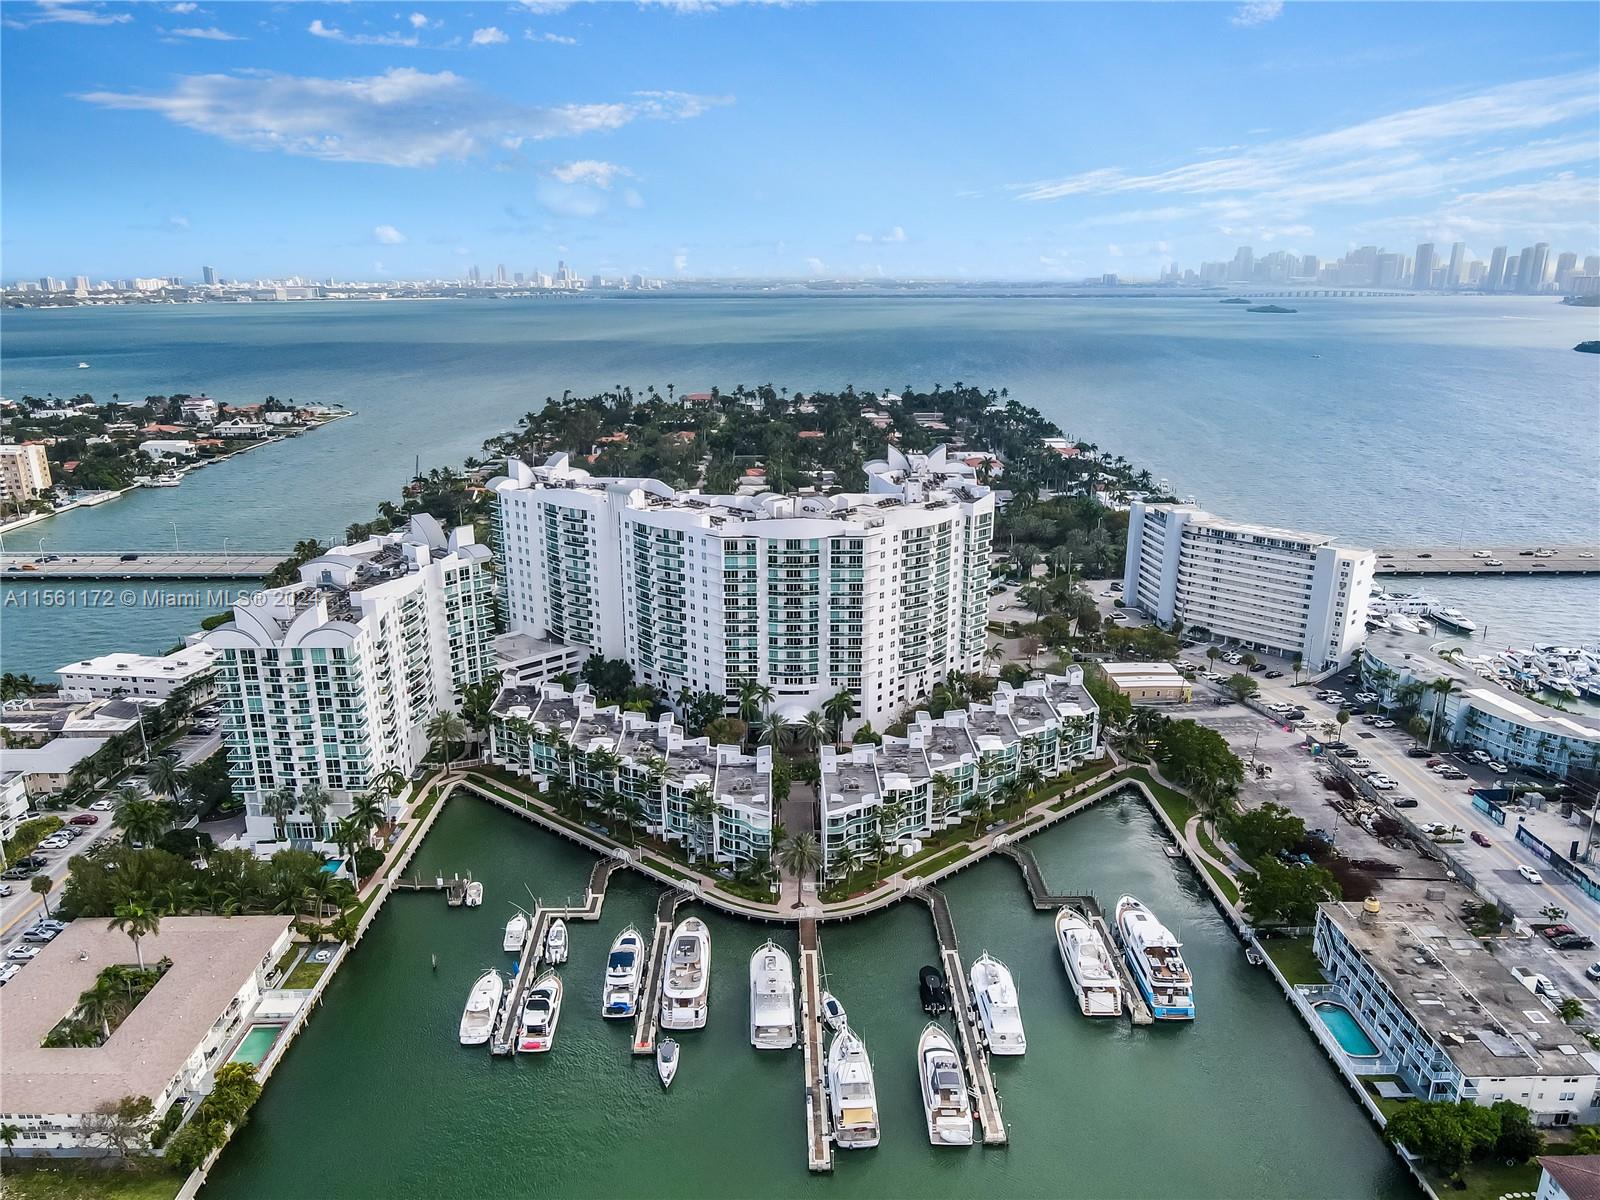 A unique opportunity for a tastefully renovated  2-bedroom, 2-bathroom unit on the 10th floor of the luxury 360 Condominium. It is close to prestigious Bal Harbor shops and restaurants, South Beach, Downtown Miami, and Brickell. The complex has a gorgeous resort-style pool, elegant lobby, gym, fantastic sauna, great waterfront area, and on-site management. The HOA includes cable, internet, sewer, trash, building insurance, and an unlimited free valet for residents and guests.
Washer and dryer in unit.